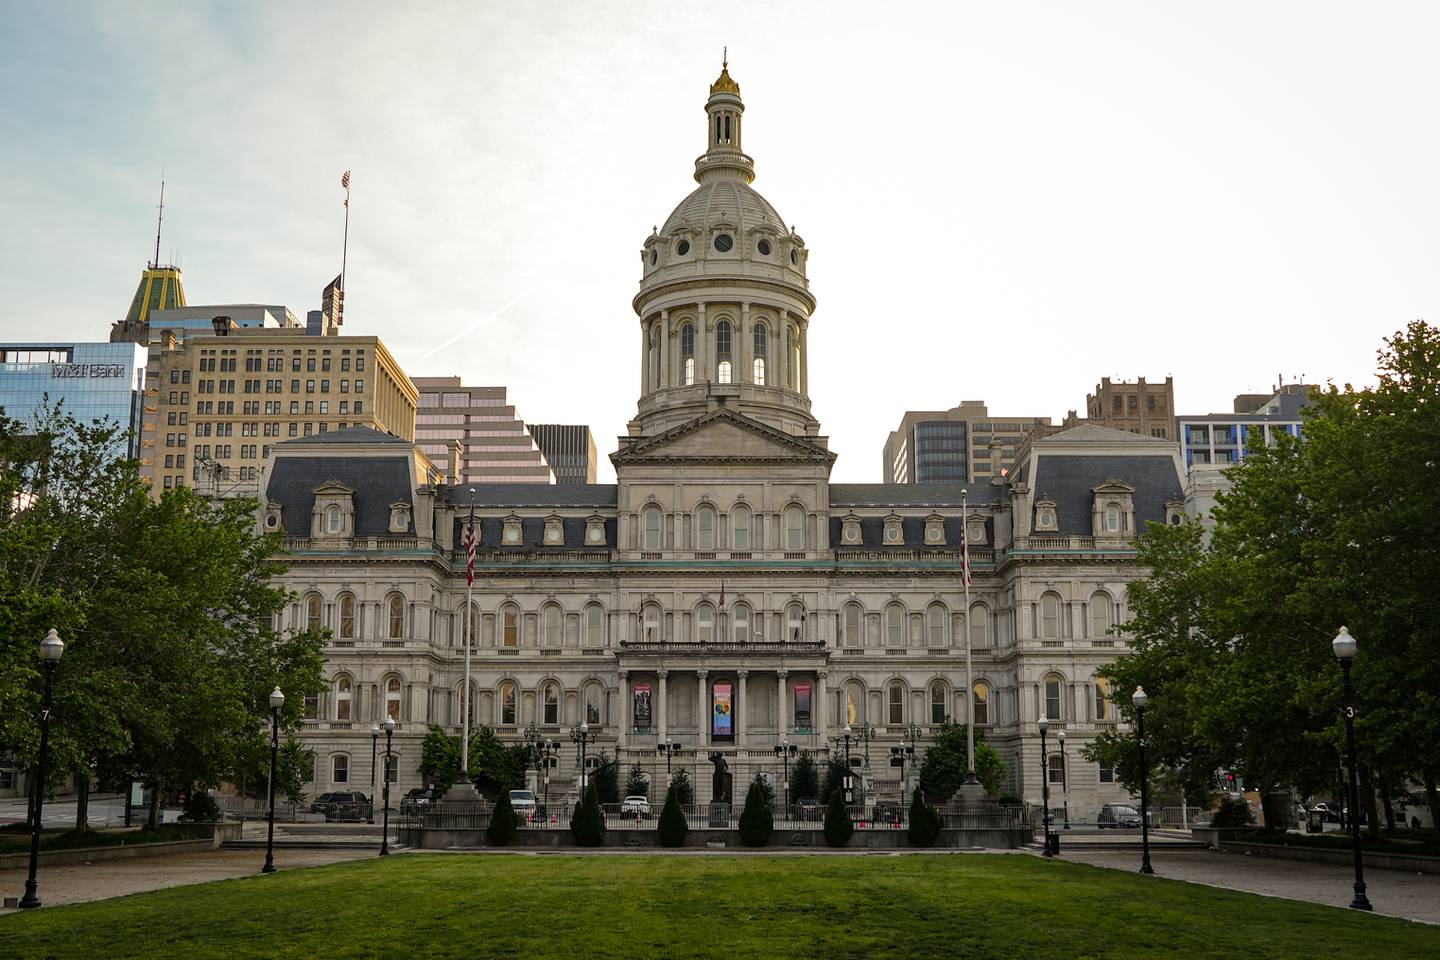 The exterior of Baltimore City Hall.